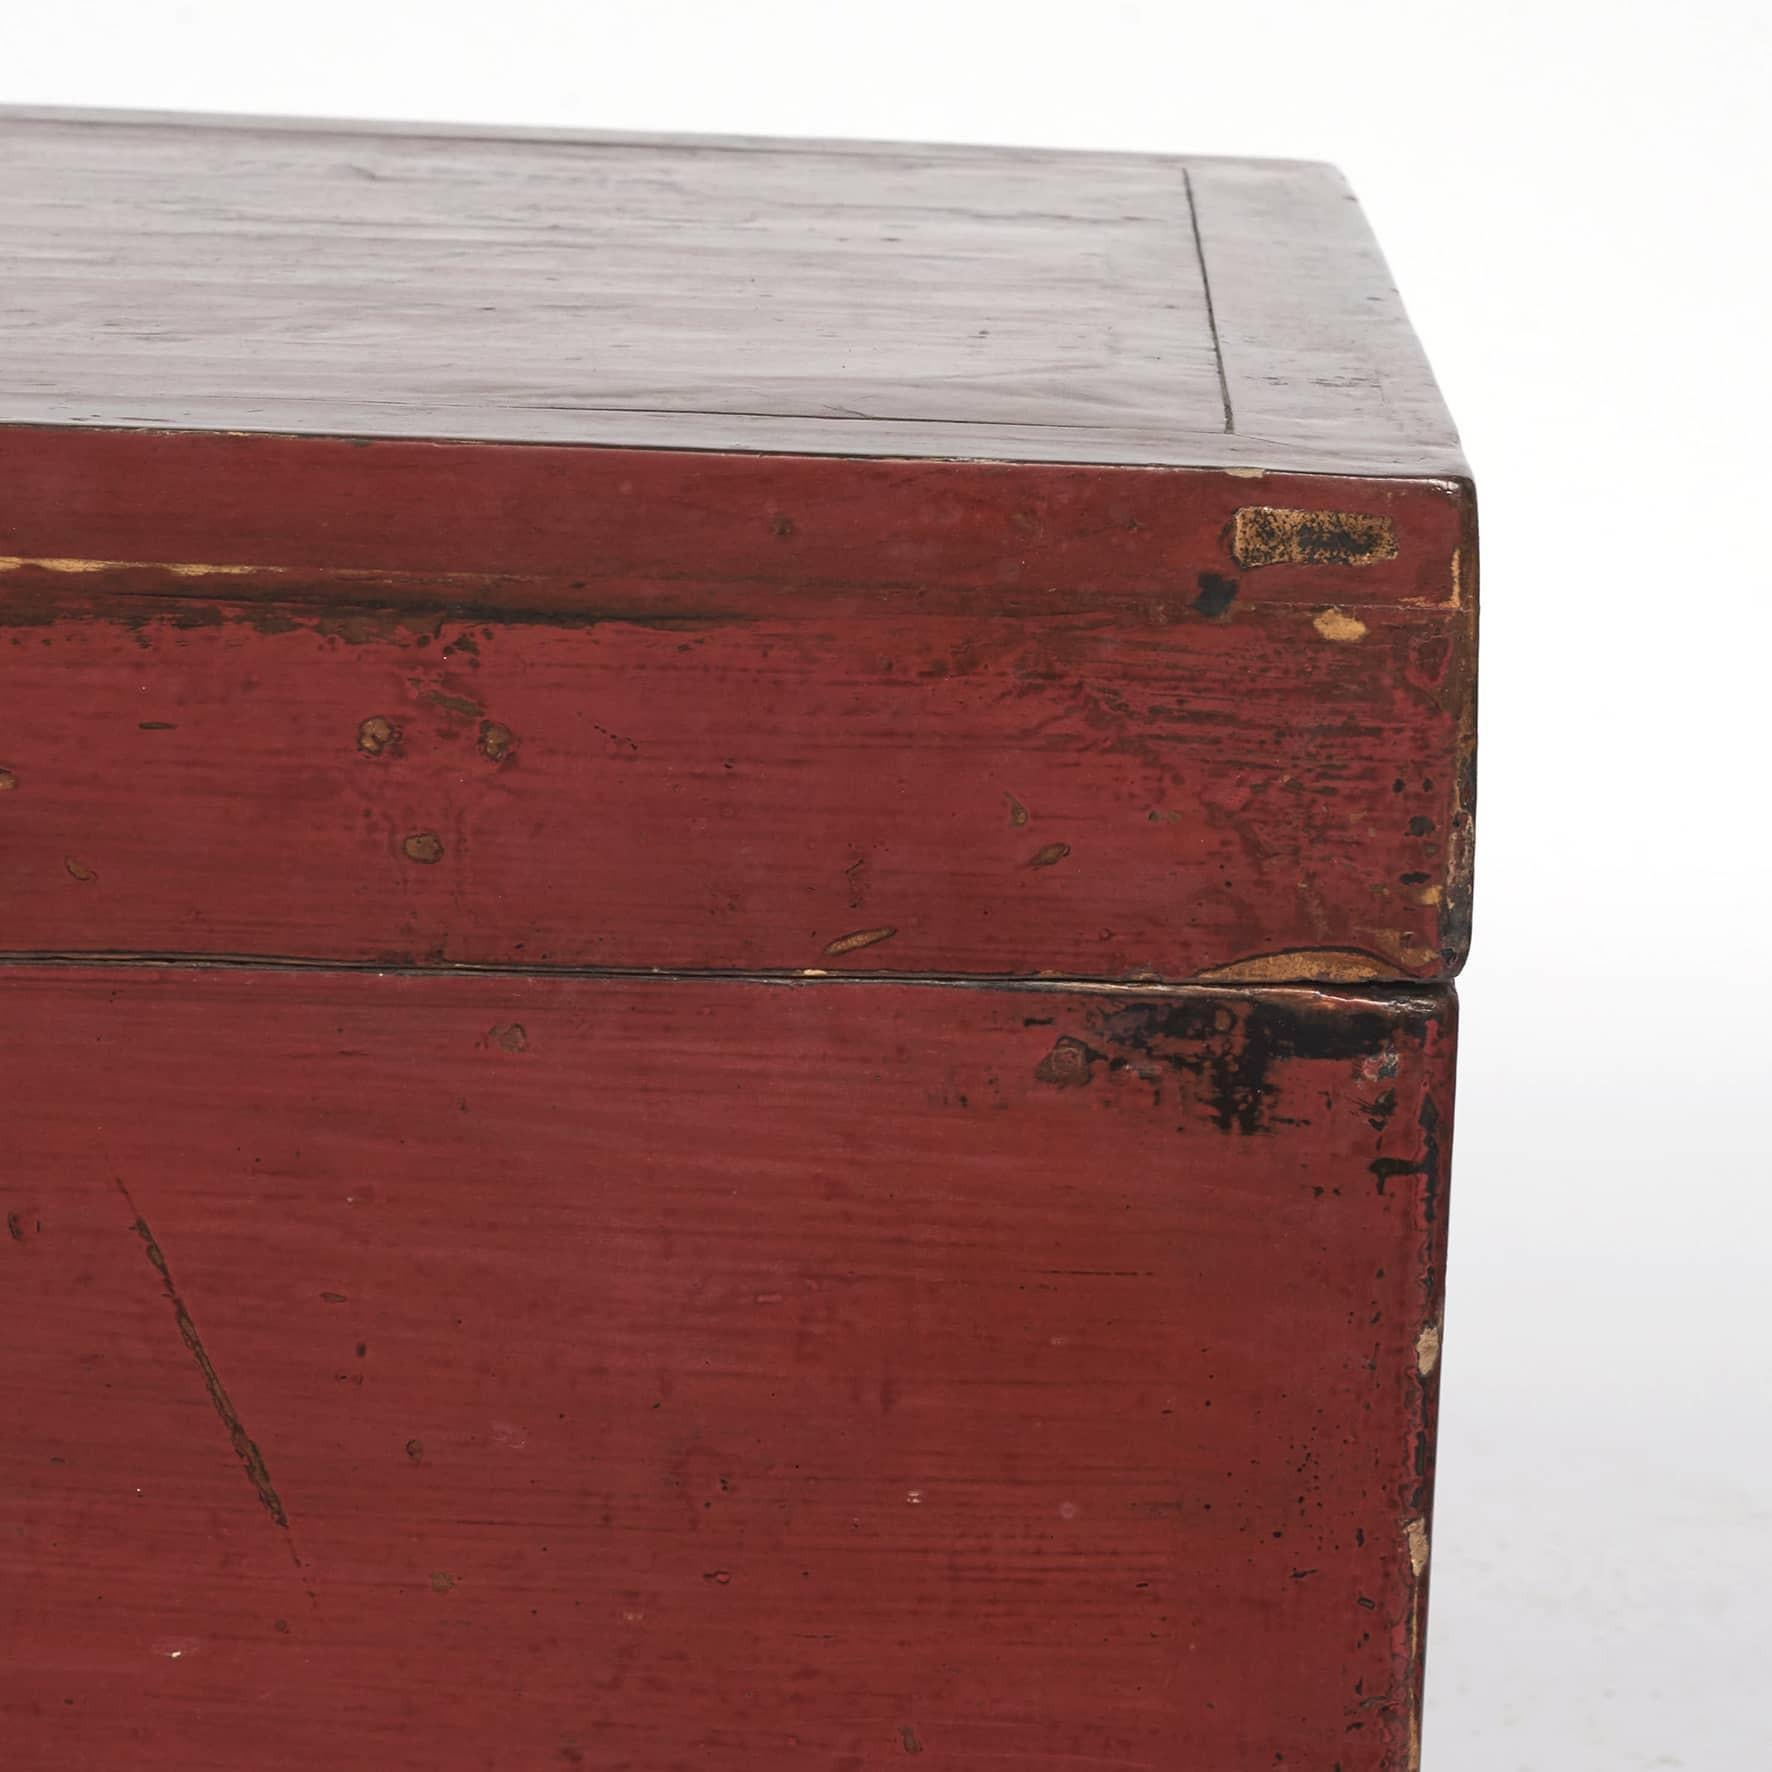 Elm Chinese Chest with Original Red Lacquer, Jiangsu, 1850-1870